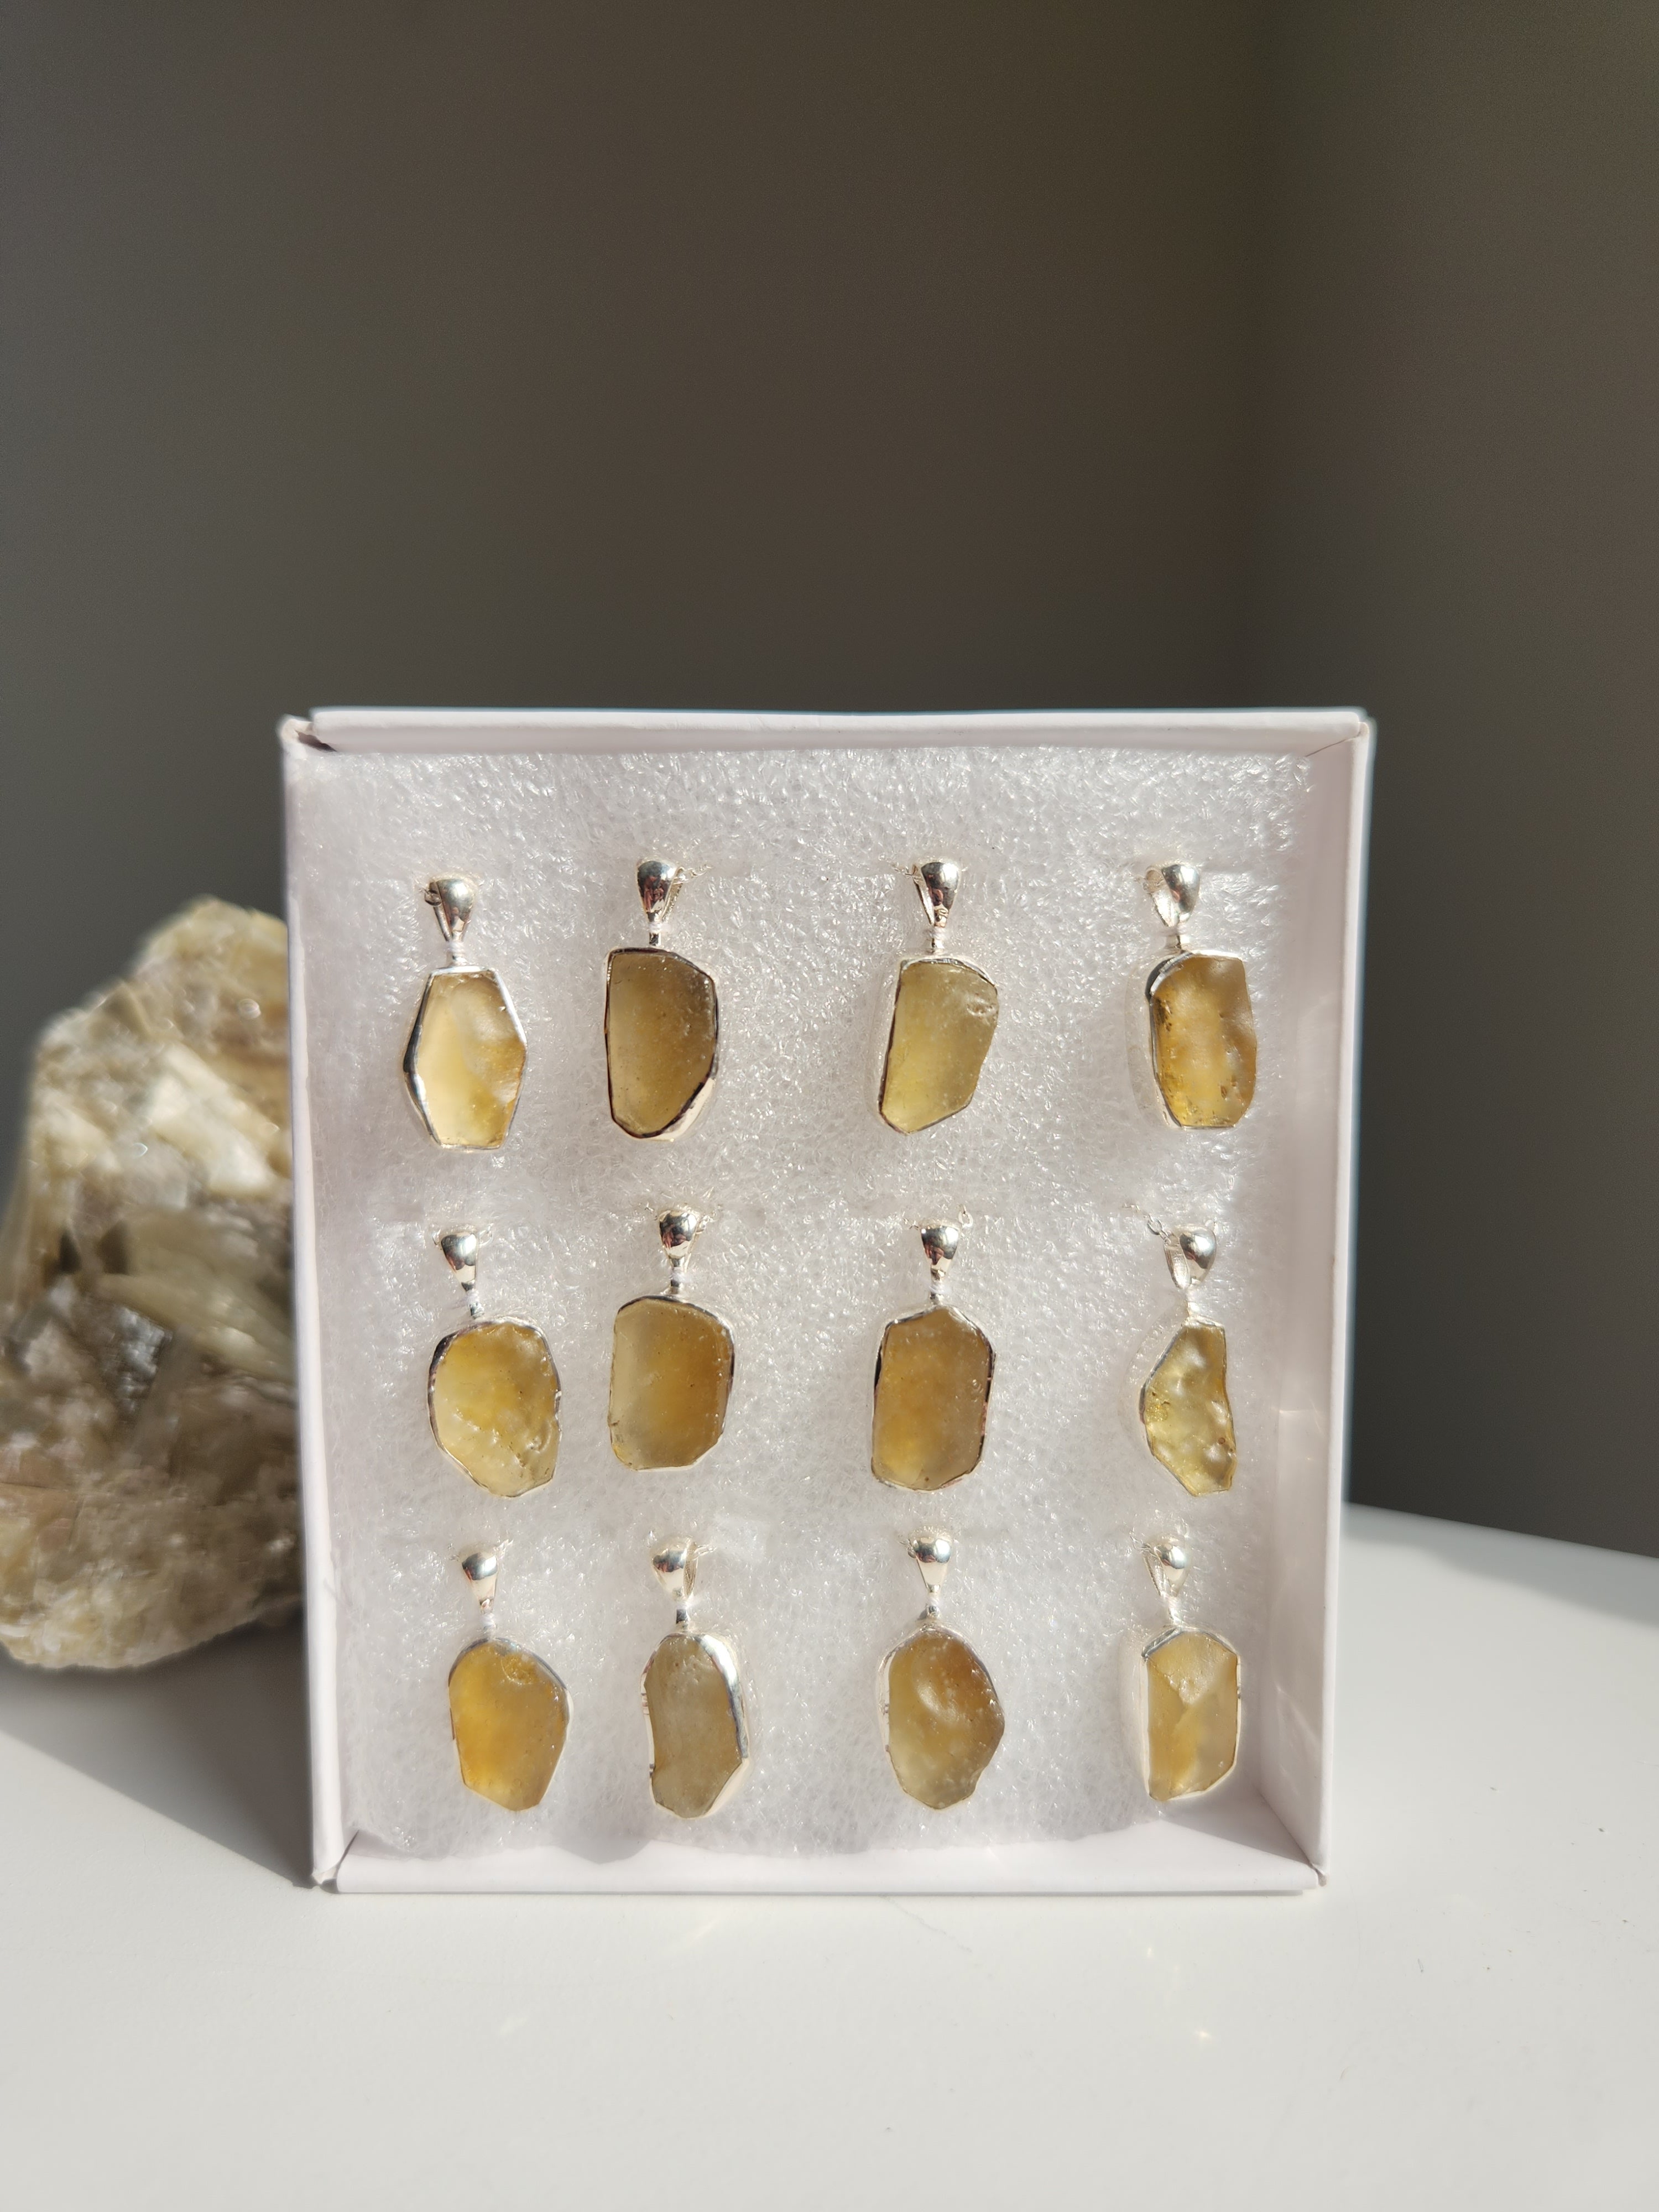 Libyan Desert Glass Necklace | Select your piece